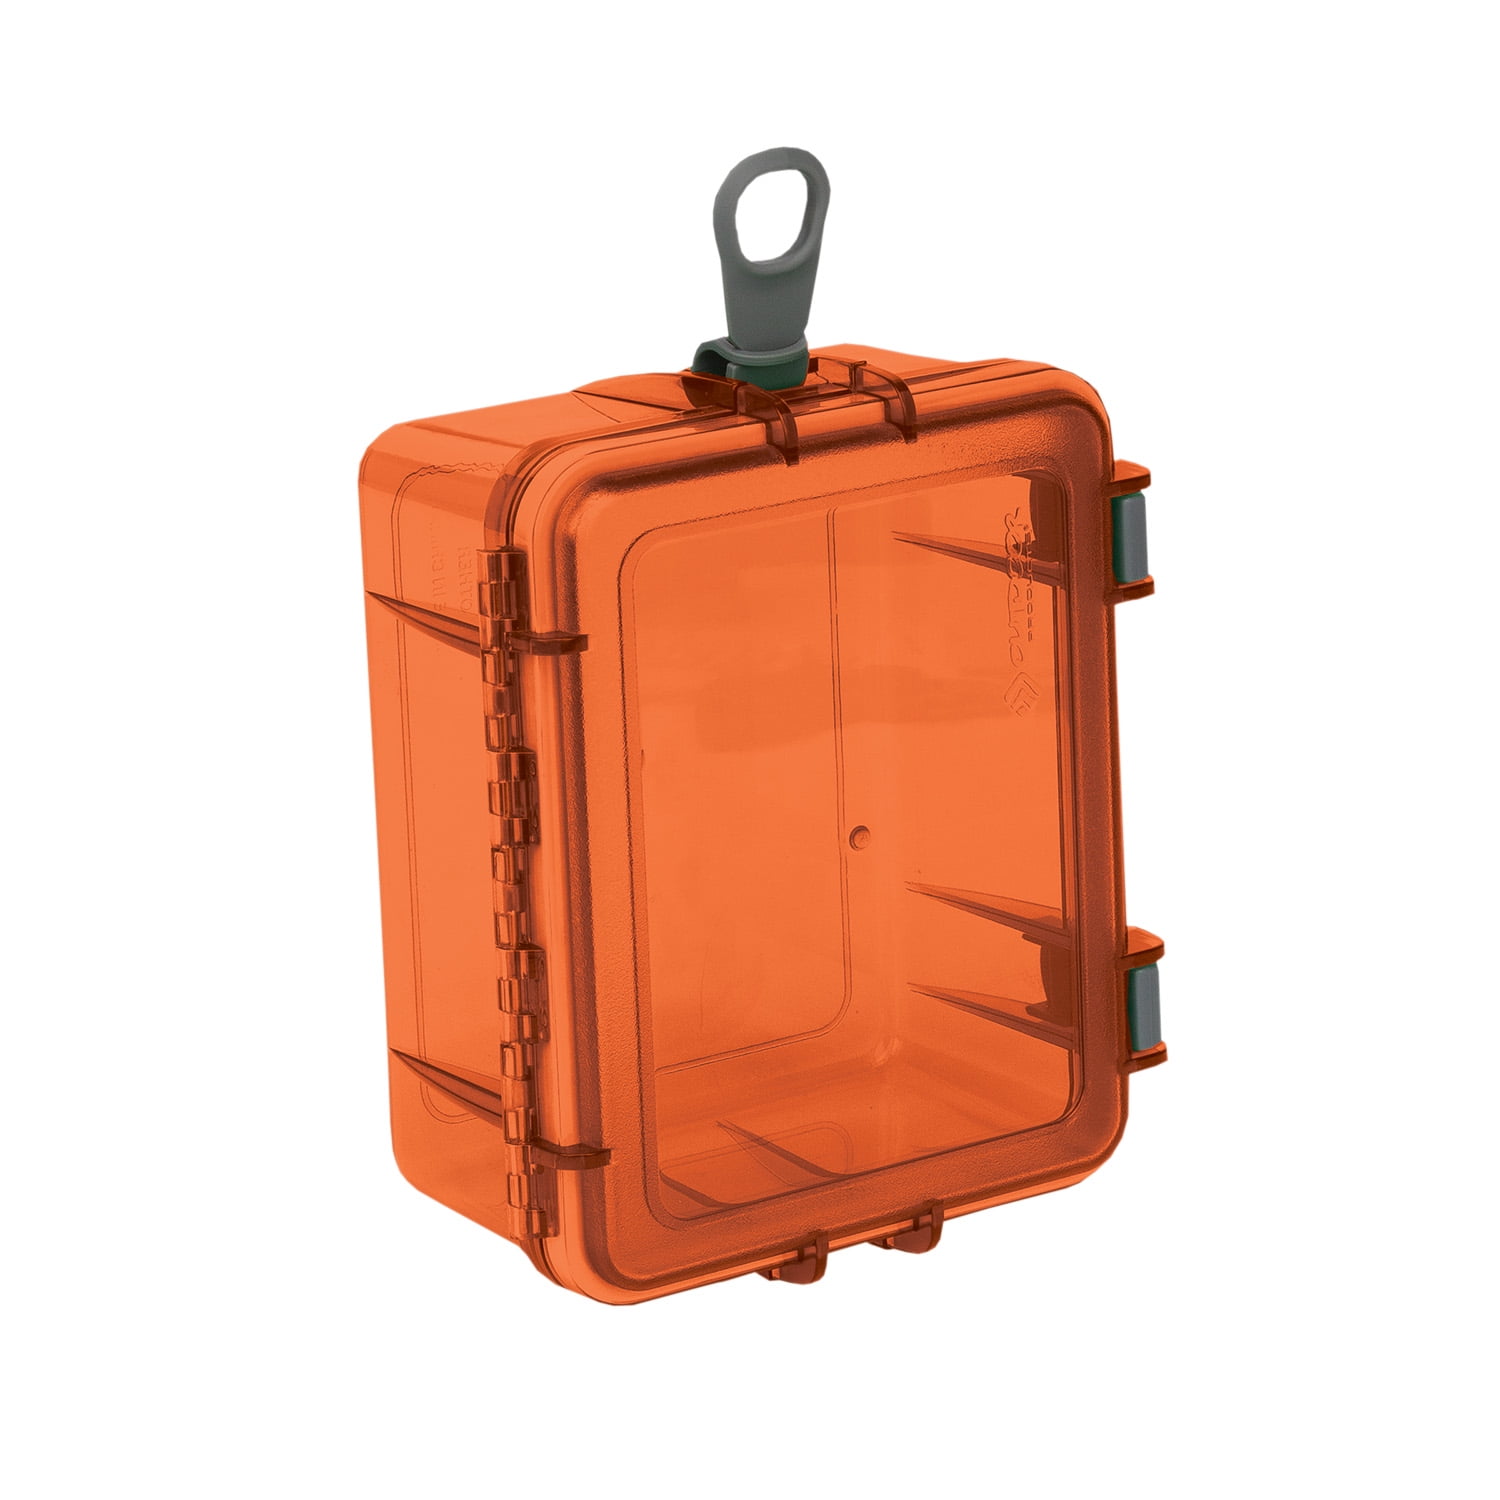 Shockproof Waterproof Storage Case Camping Boating Container Dry Box Orange 